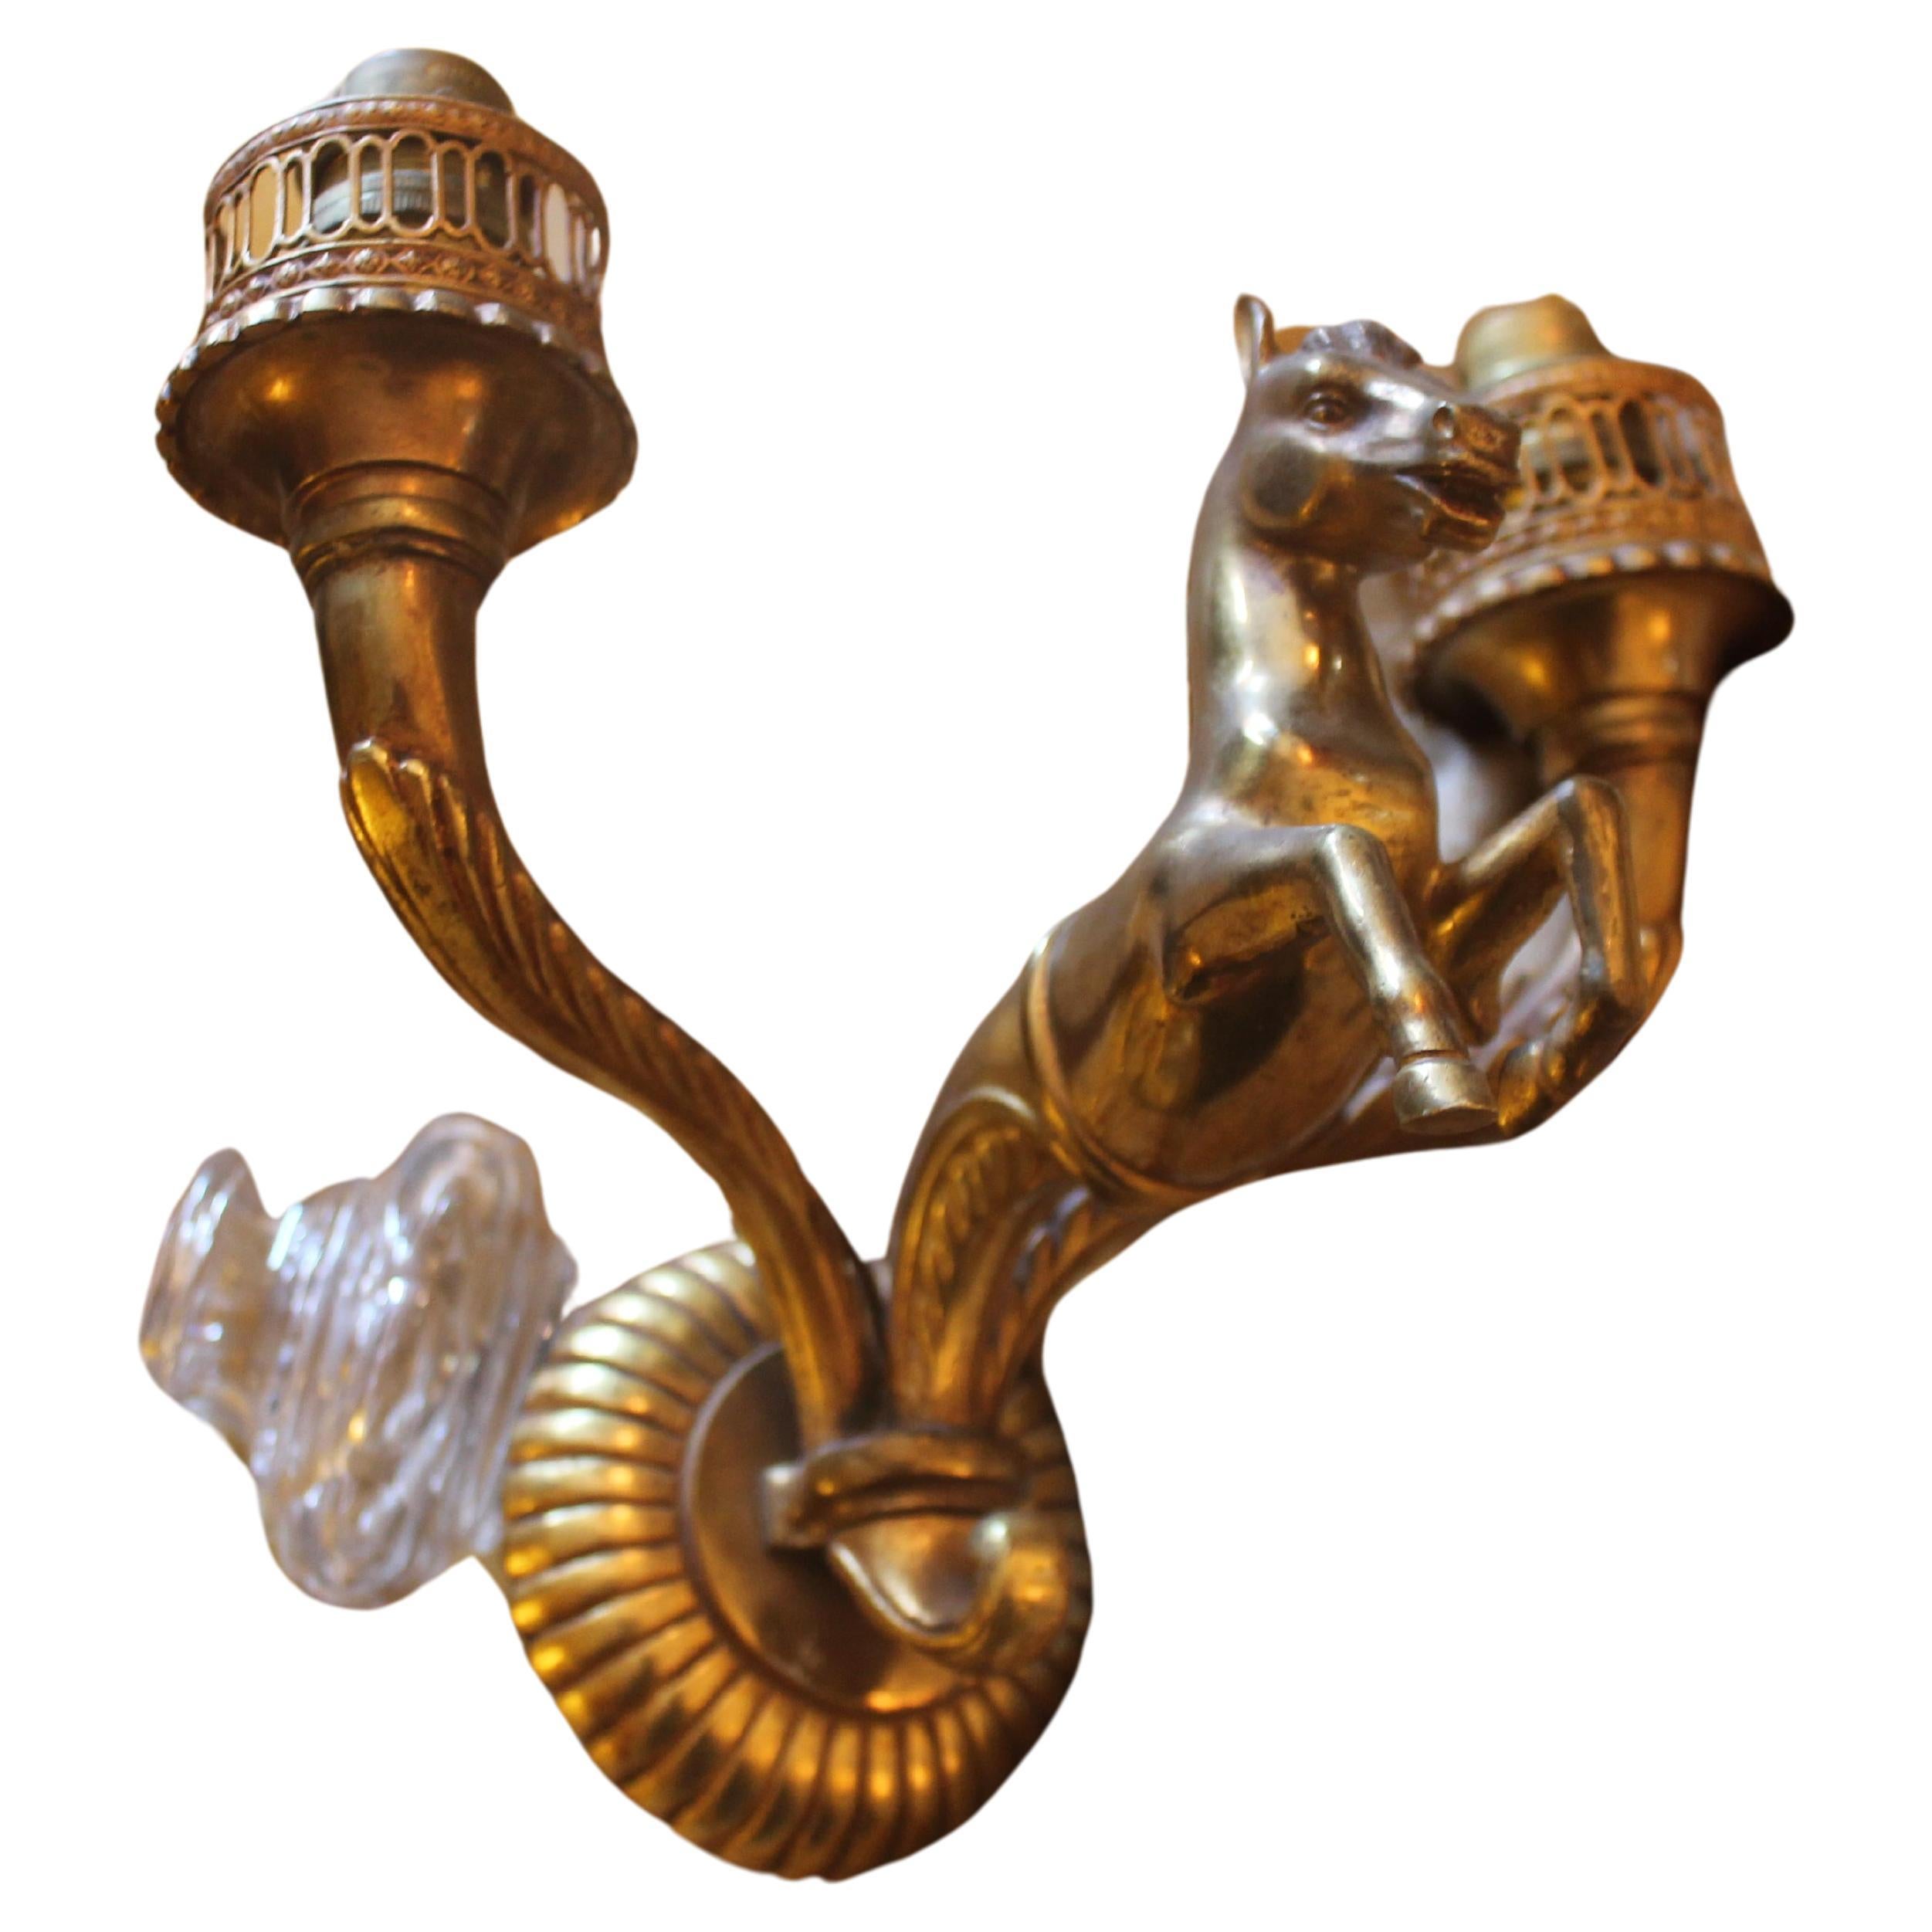 1930s French Art Deco Bronze "Equine" Horse Figural Wall Sconce attr. Jansen. For Sale